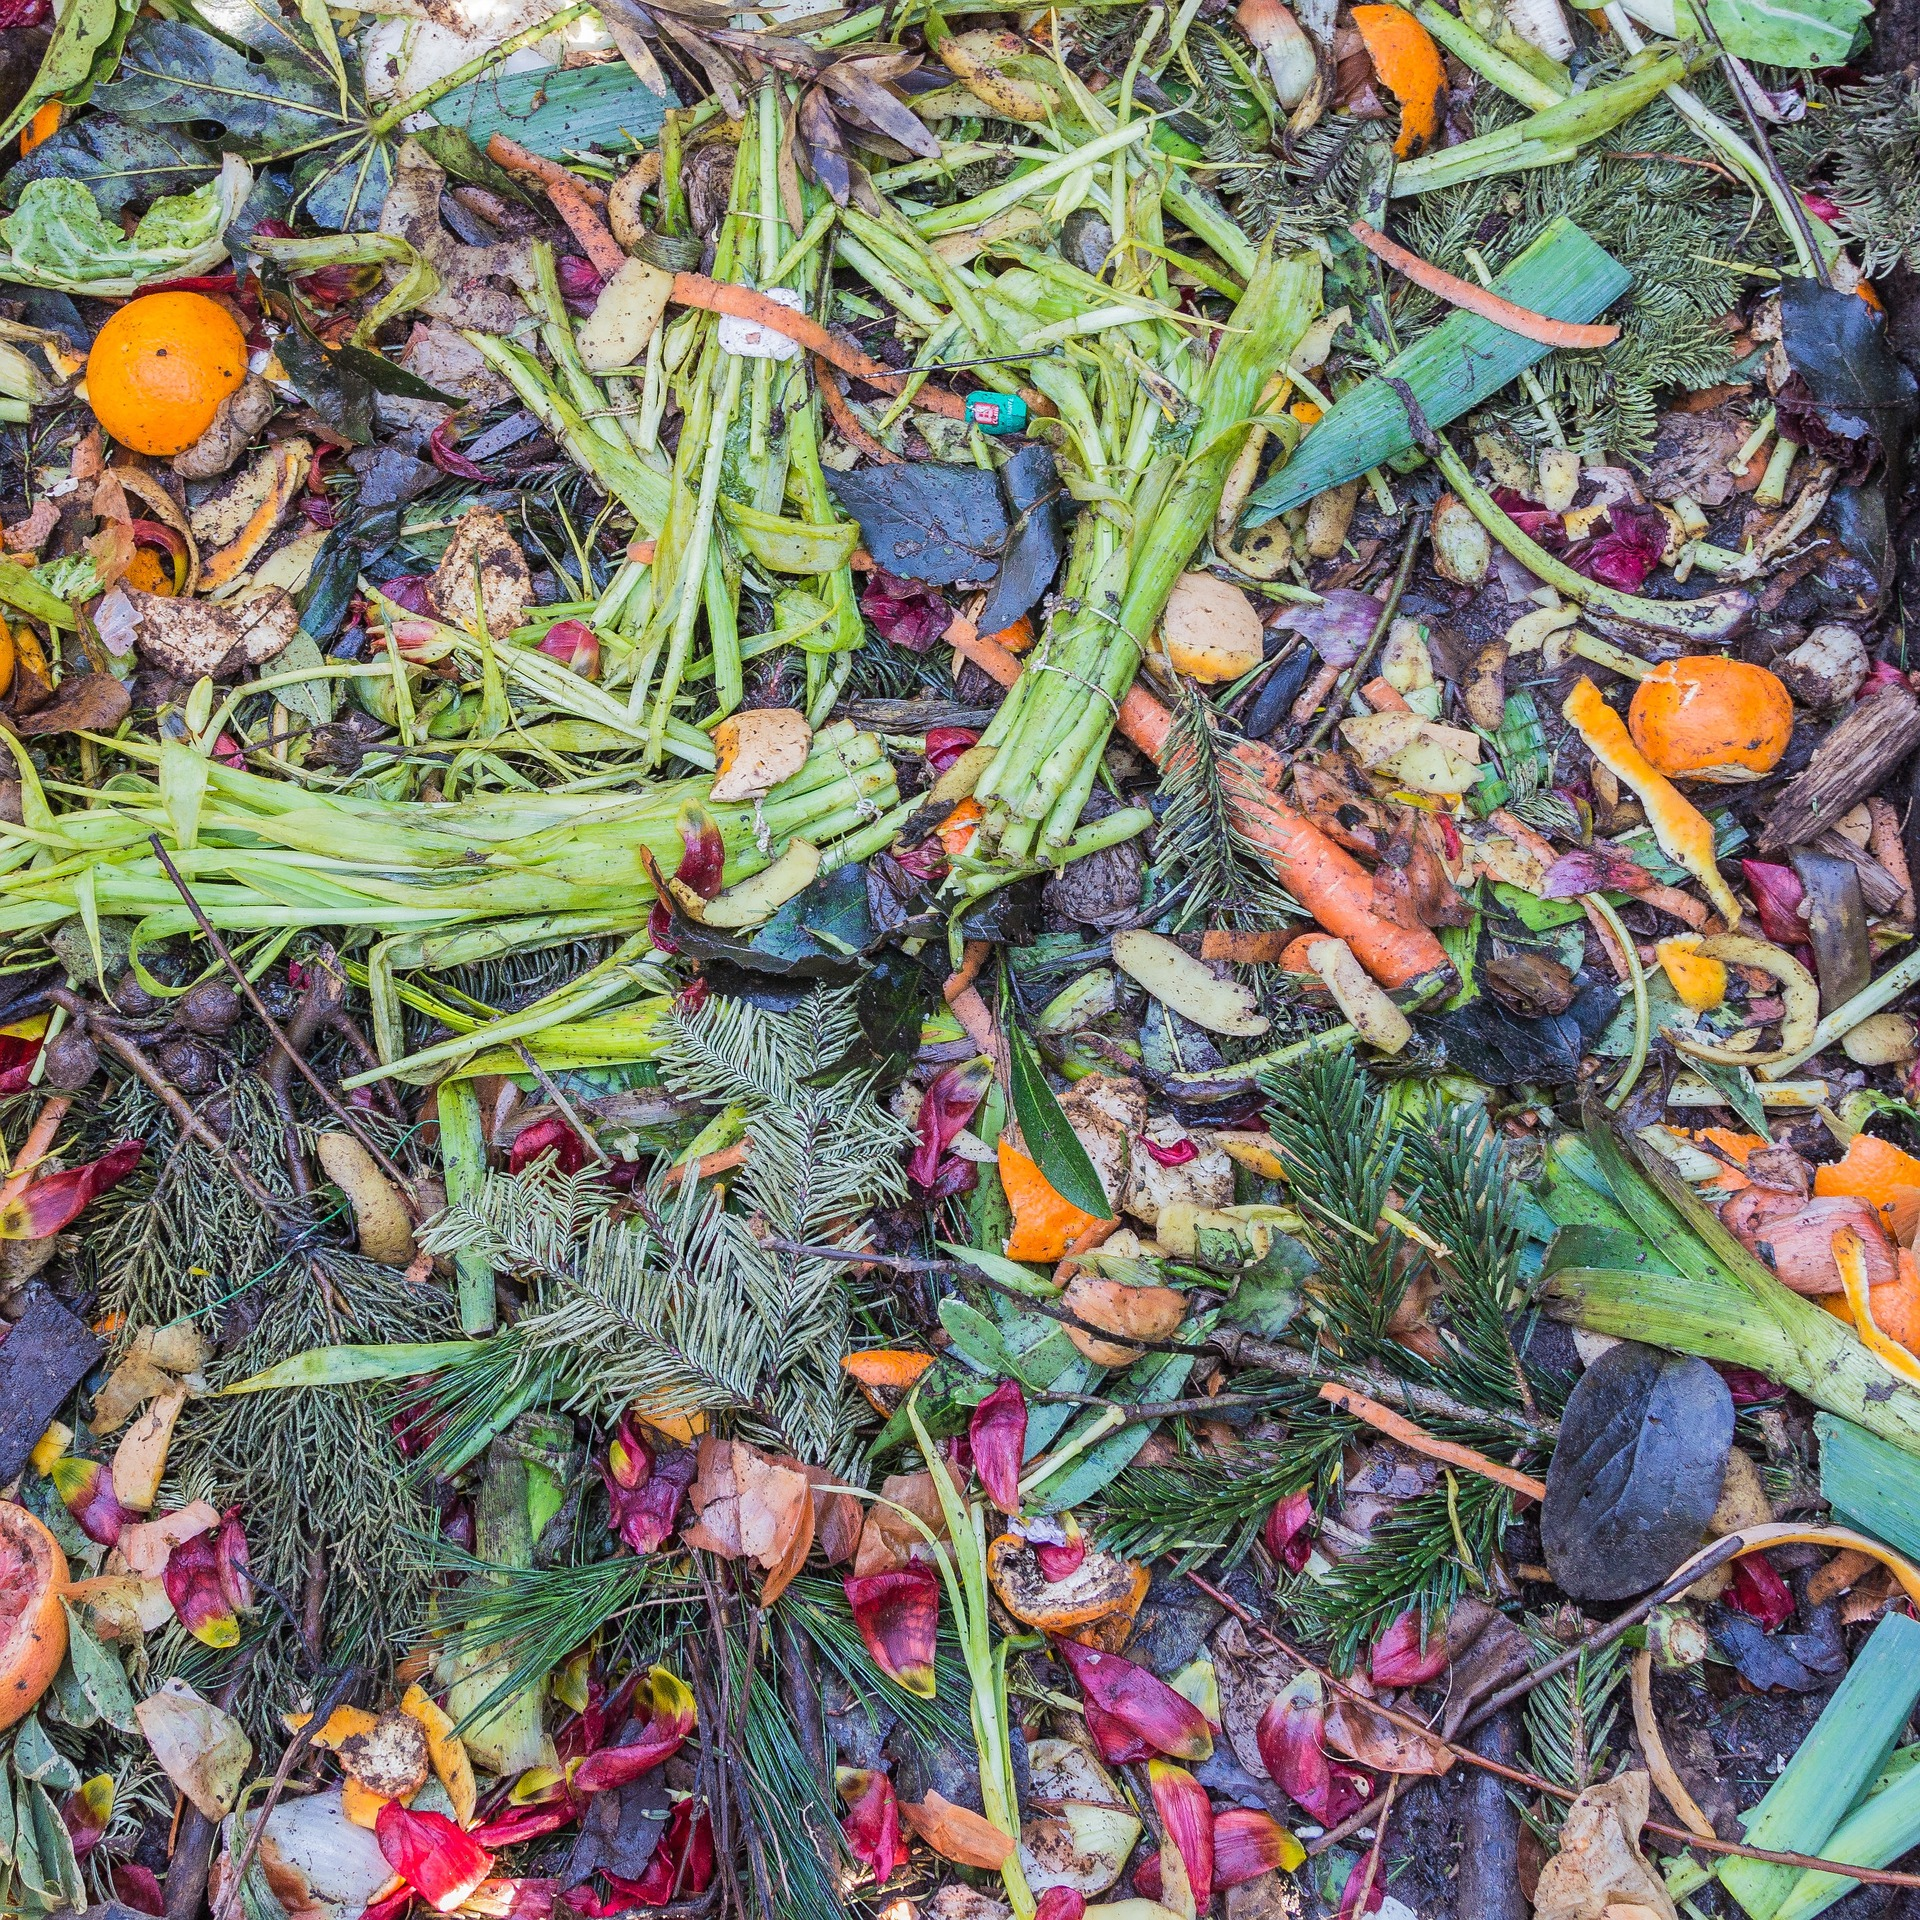 Photo of food scraps and compost ingredients